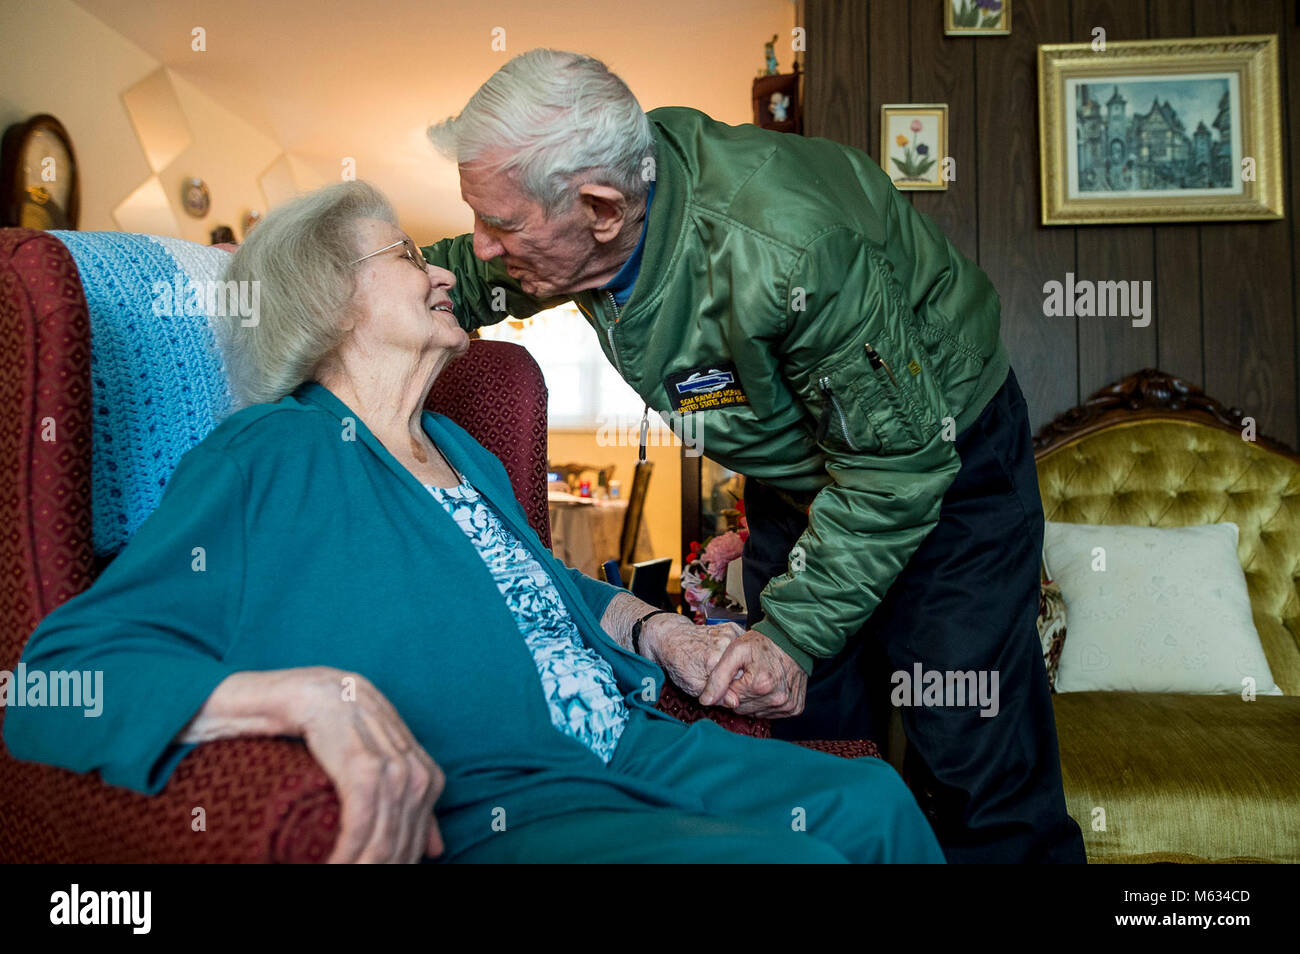 Sgt. Maj. Raymond Moran (Ret.), affectionately known as the 'Old Soldier,' leans in to kiss his wife, Barbara, of 65 years marriage at their home in Odenton, Maryland, Feb. 11, 2018. The Morans officially celebrate their wedding anniversary on Valentine's Day. They were married Feb. 14, 1953. Raymond is originally from Latrobe, Pennsylvania, and Barbara is from Slovan, Pennsylvania. With this milestone, their years of marriage match the same number of years Moran committed to service in the Army and Army Reserve. Raymond enlisted in 1948, and served in Korea, Vietnam, Japan, Cambodia and durin Stock Photo